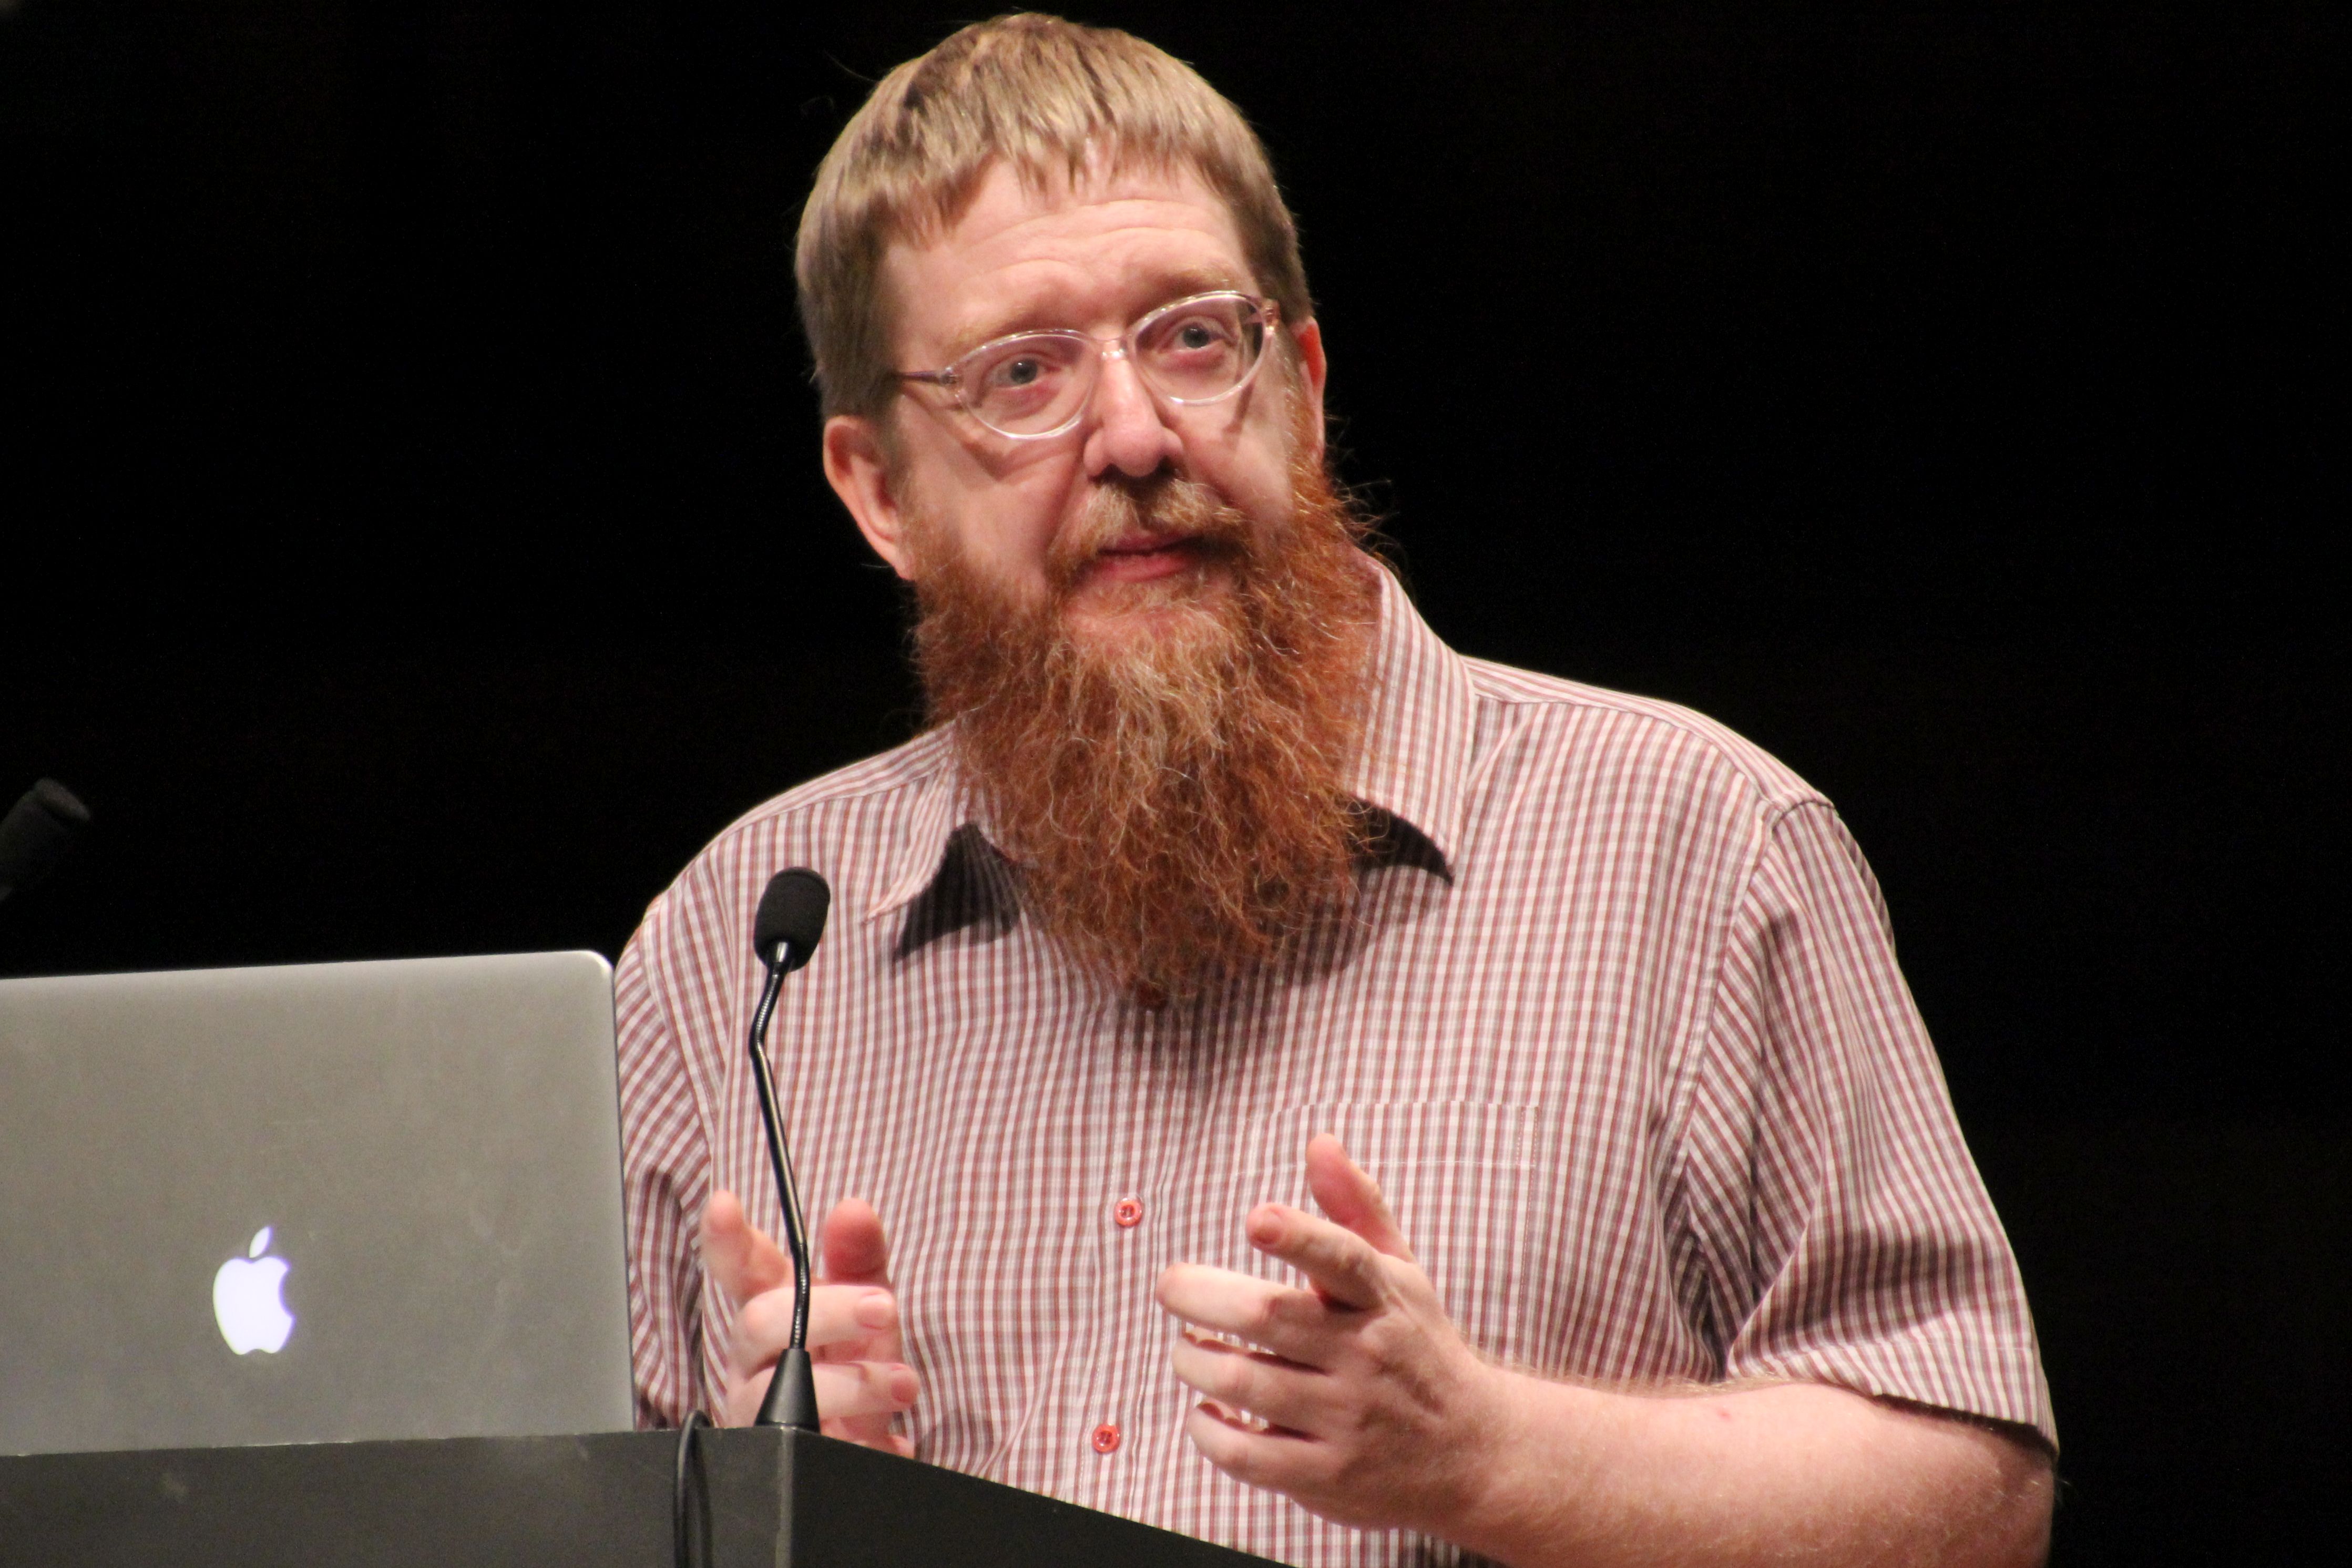 Andy Mabbett at Wikimania 2014 in London. Photo: Lionel Allorge. License: CC-BY-SA-3.0